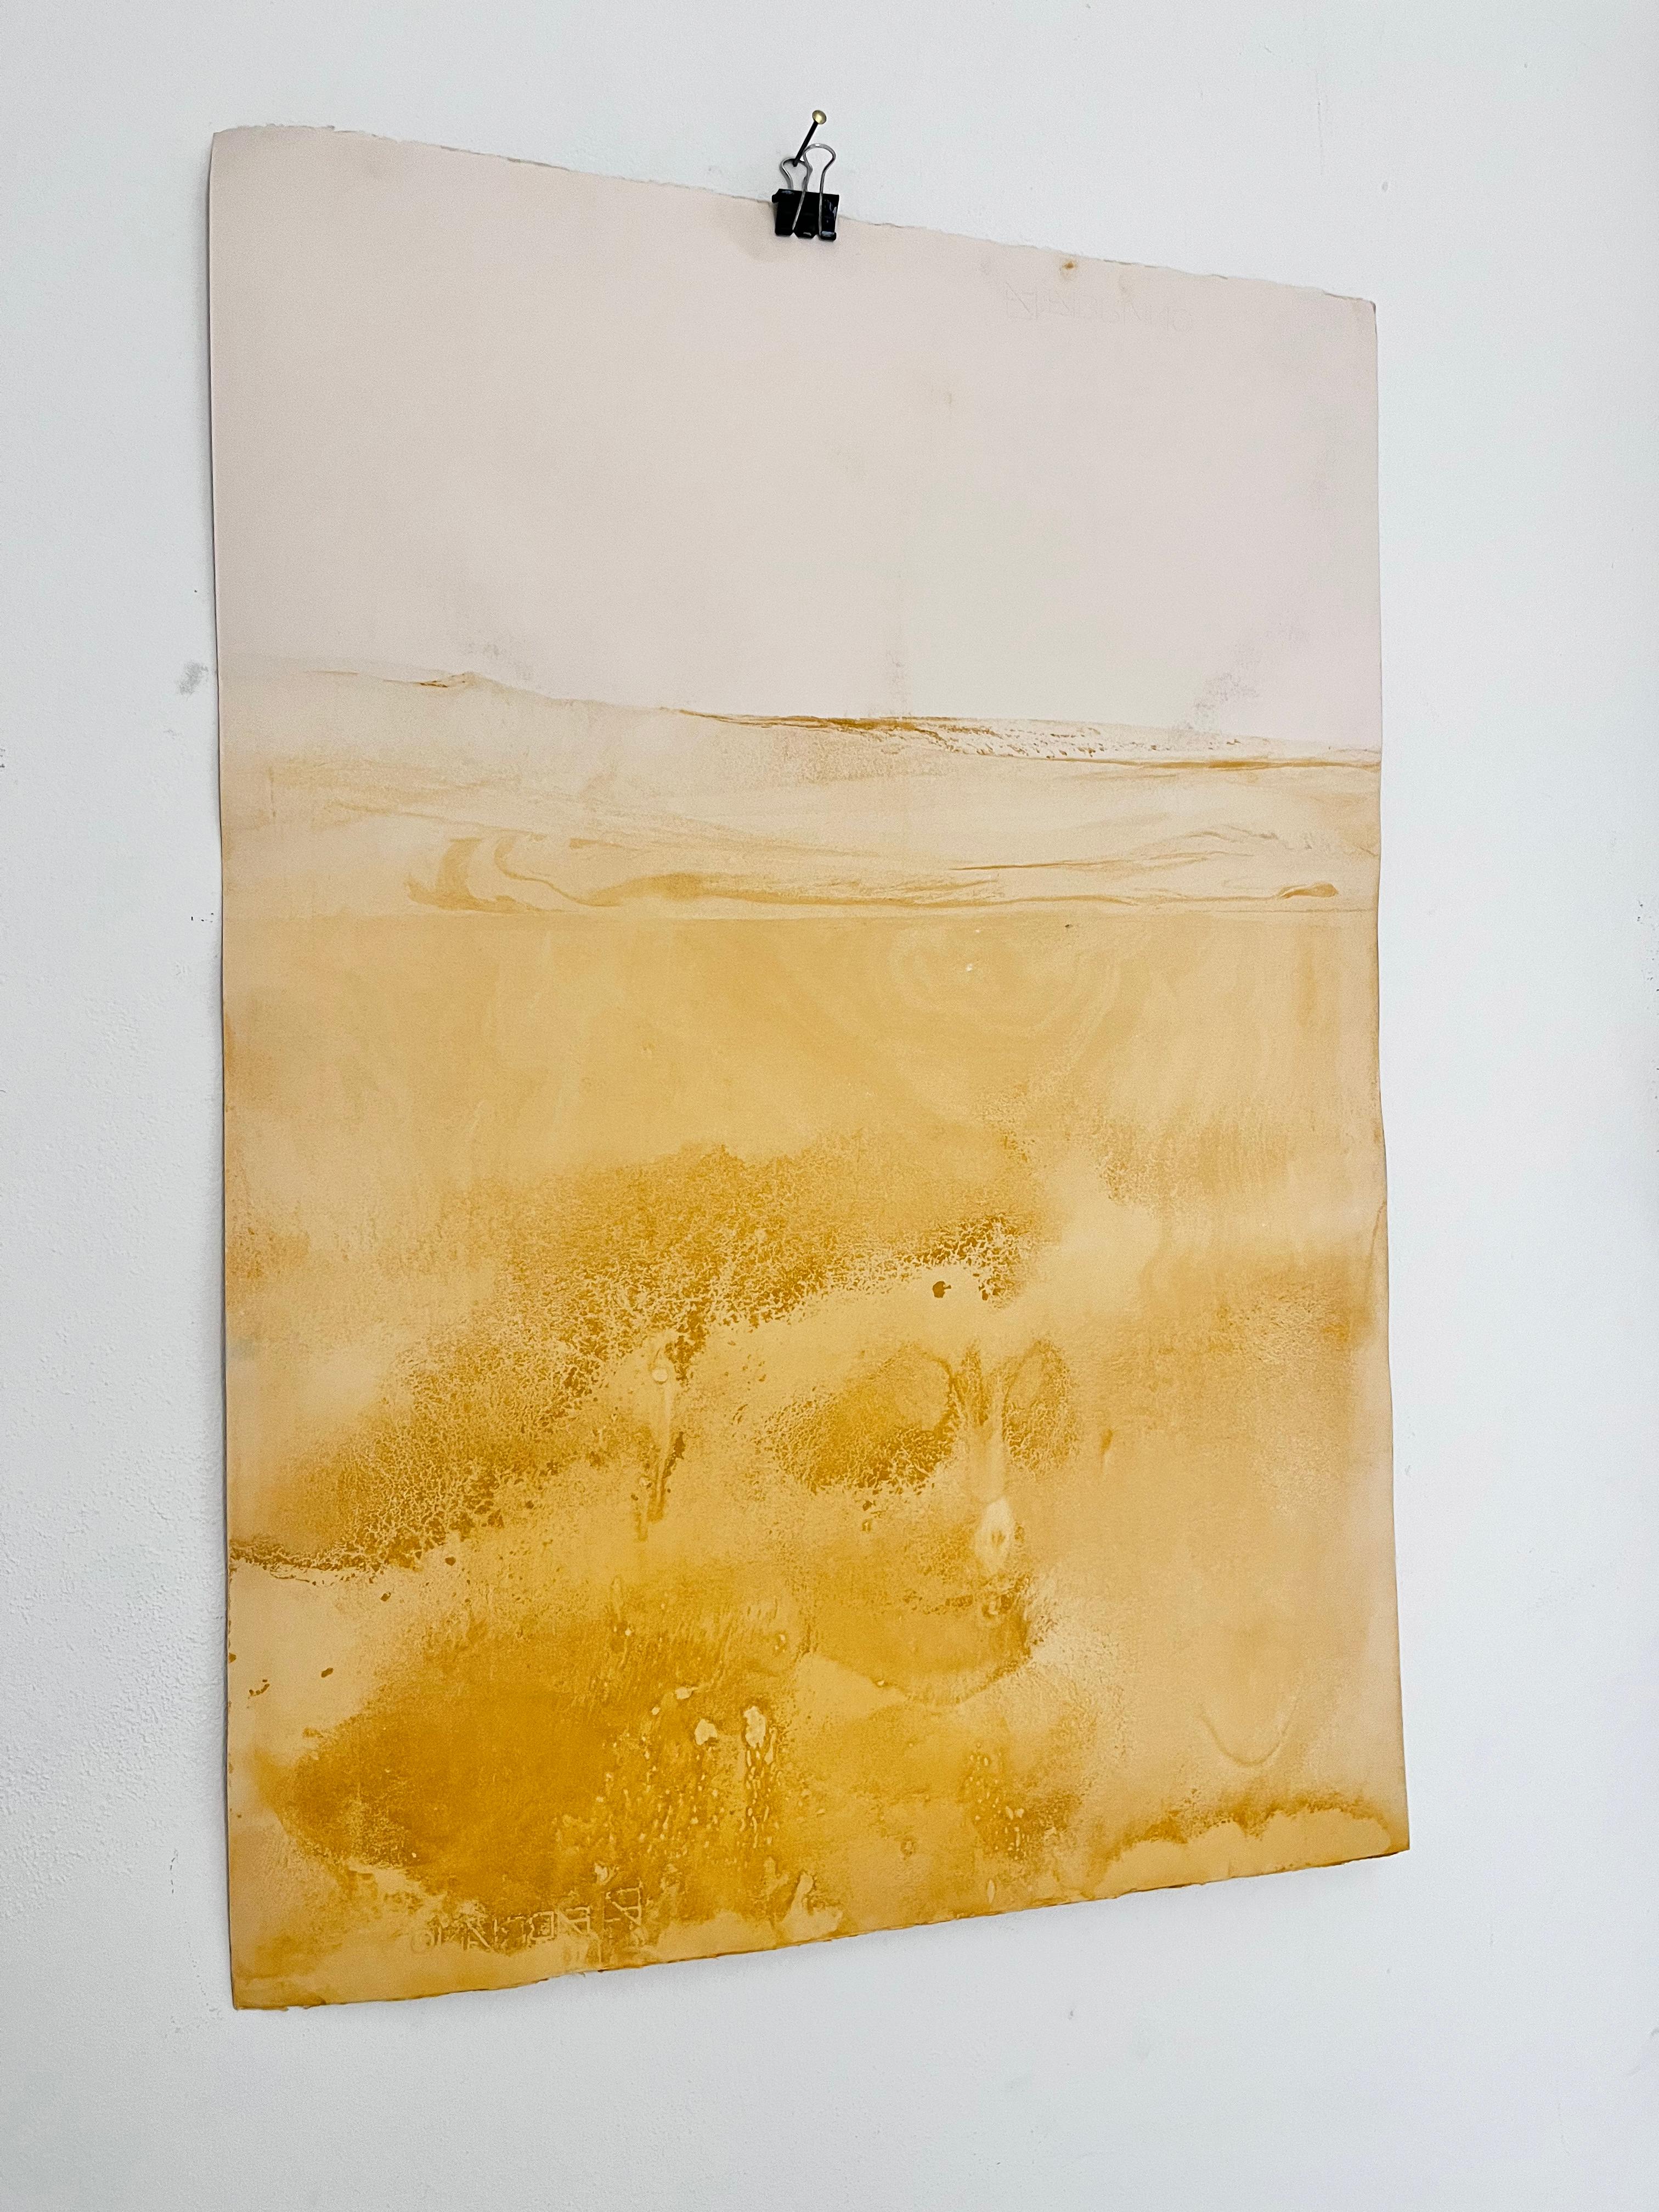 Landscape
mineral oxide on Paper
(Fabriano Rosaspina Papers)
original ART
50x70 cm
